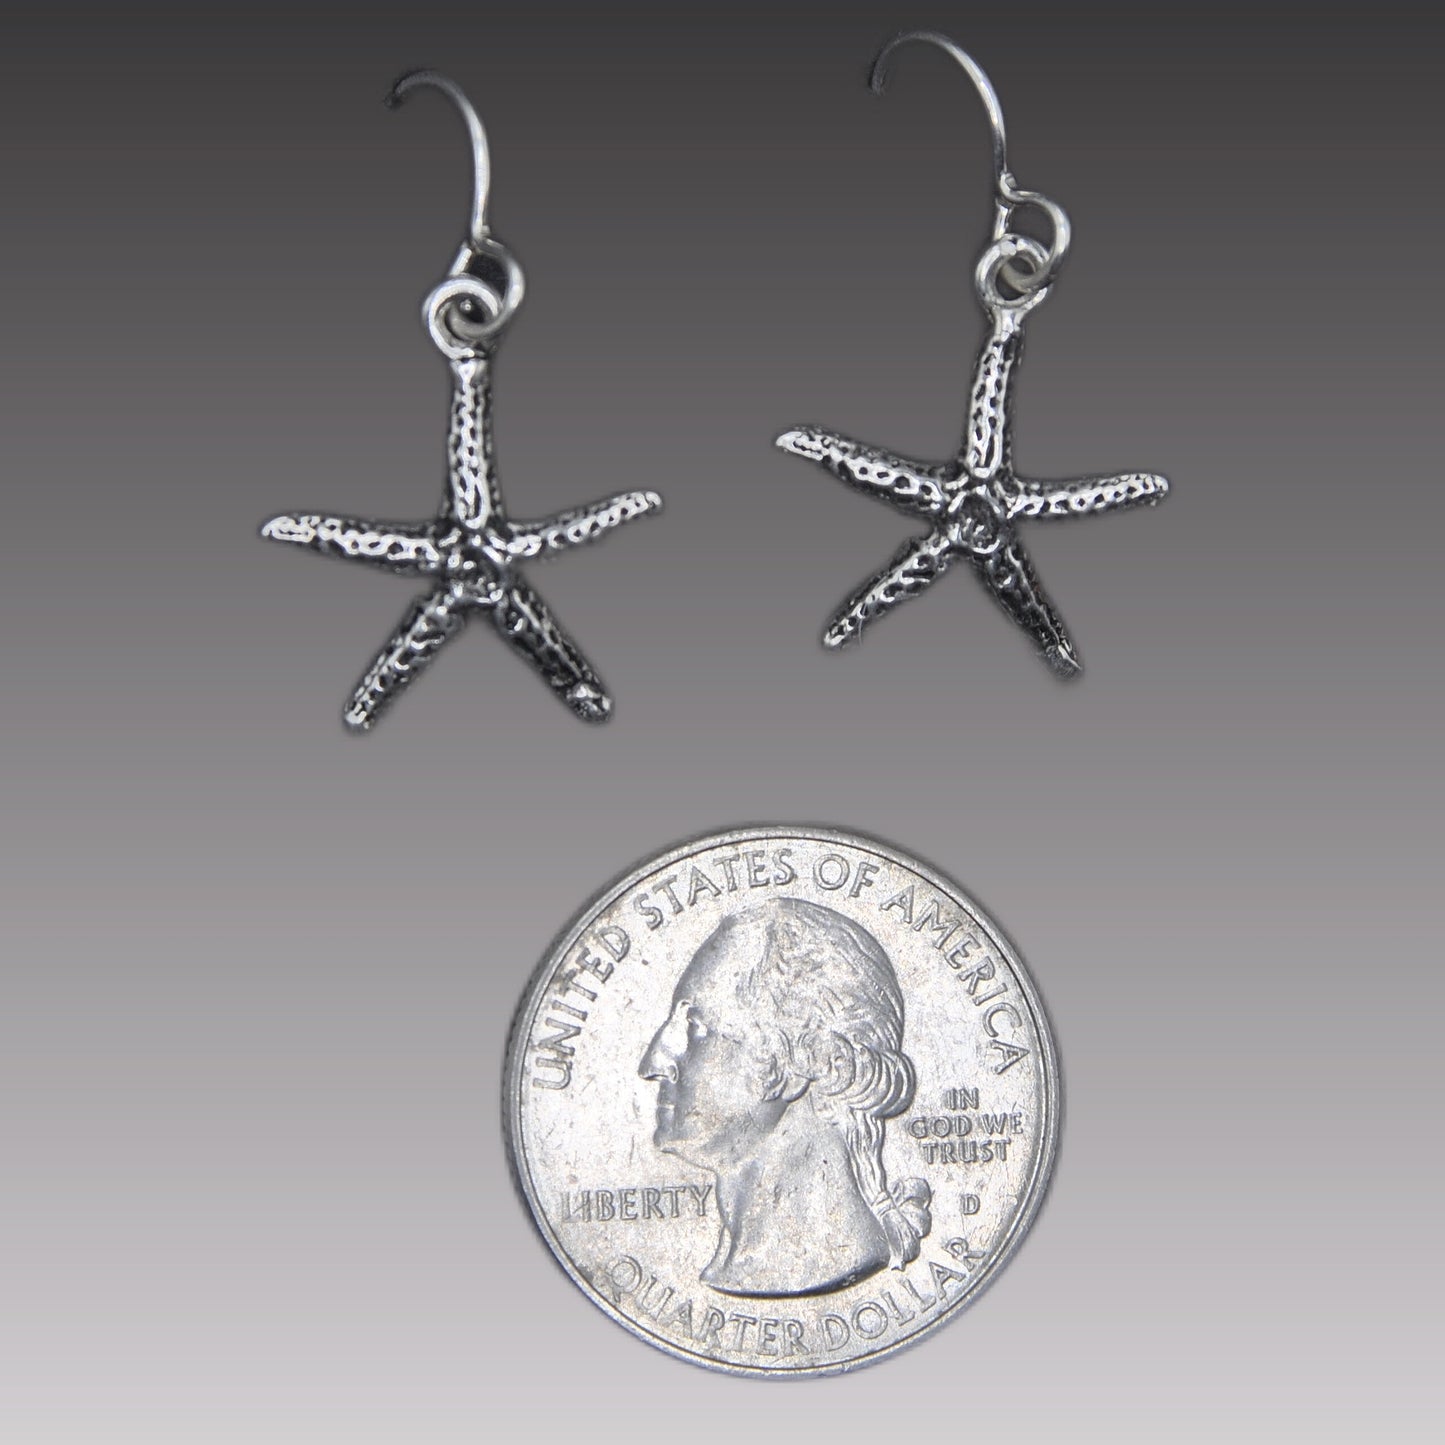 Starfish Earrings, Handcrafted Recycled Silve Sea Star Jewelry Endangered Species .925